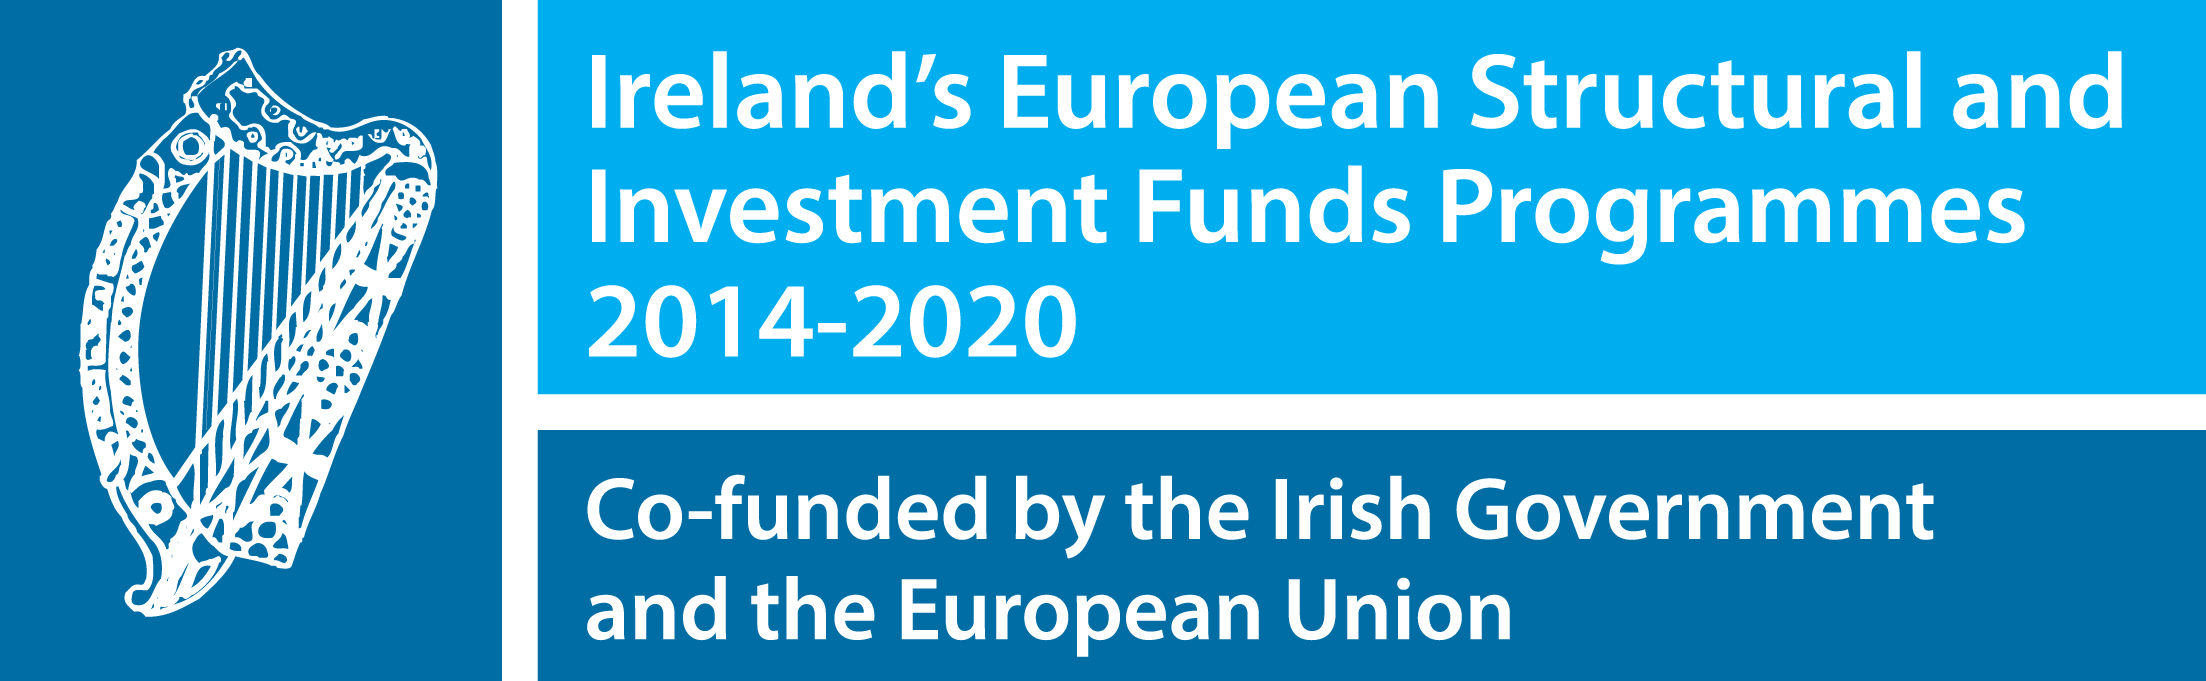 Ireland's European structural and investment funds programmes